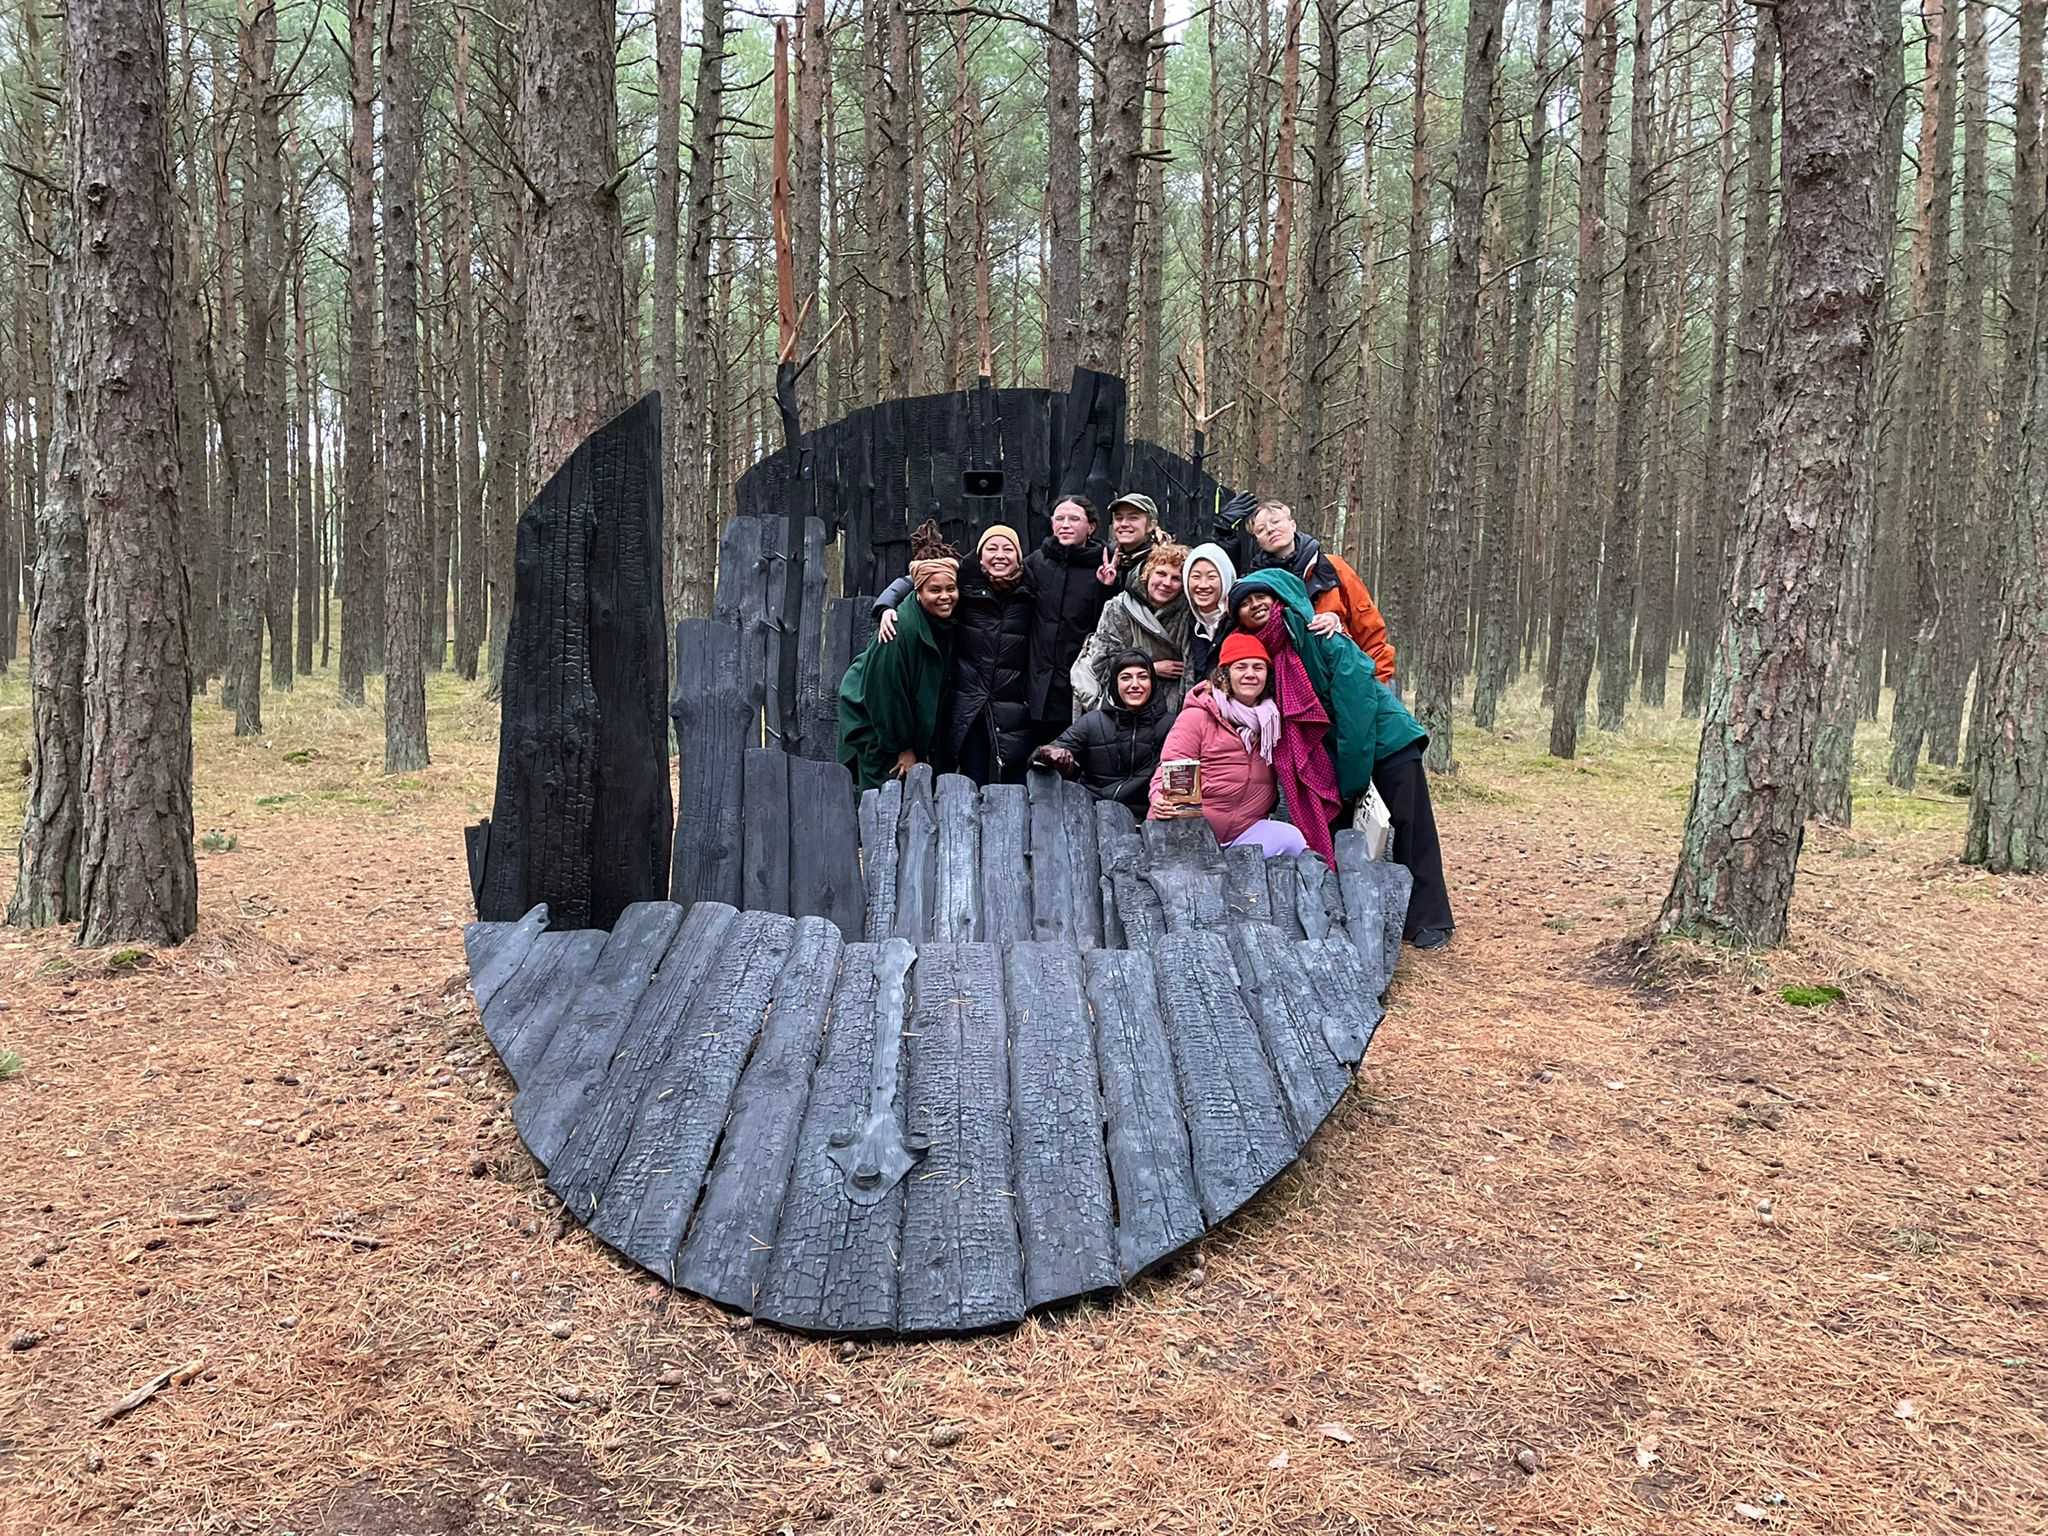 Hypatia Vourloumis 2021-2022 How To Do Things With Theory group at DAI. Photo: Hannah Jones, Nida, Lithuania. 14 November 2021.